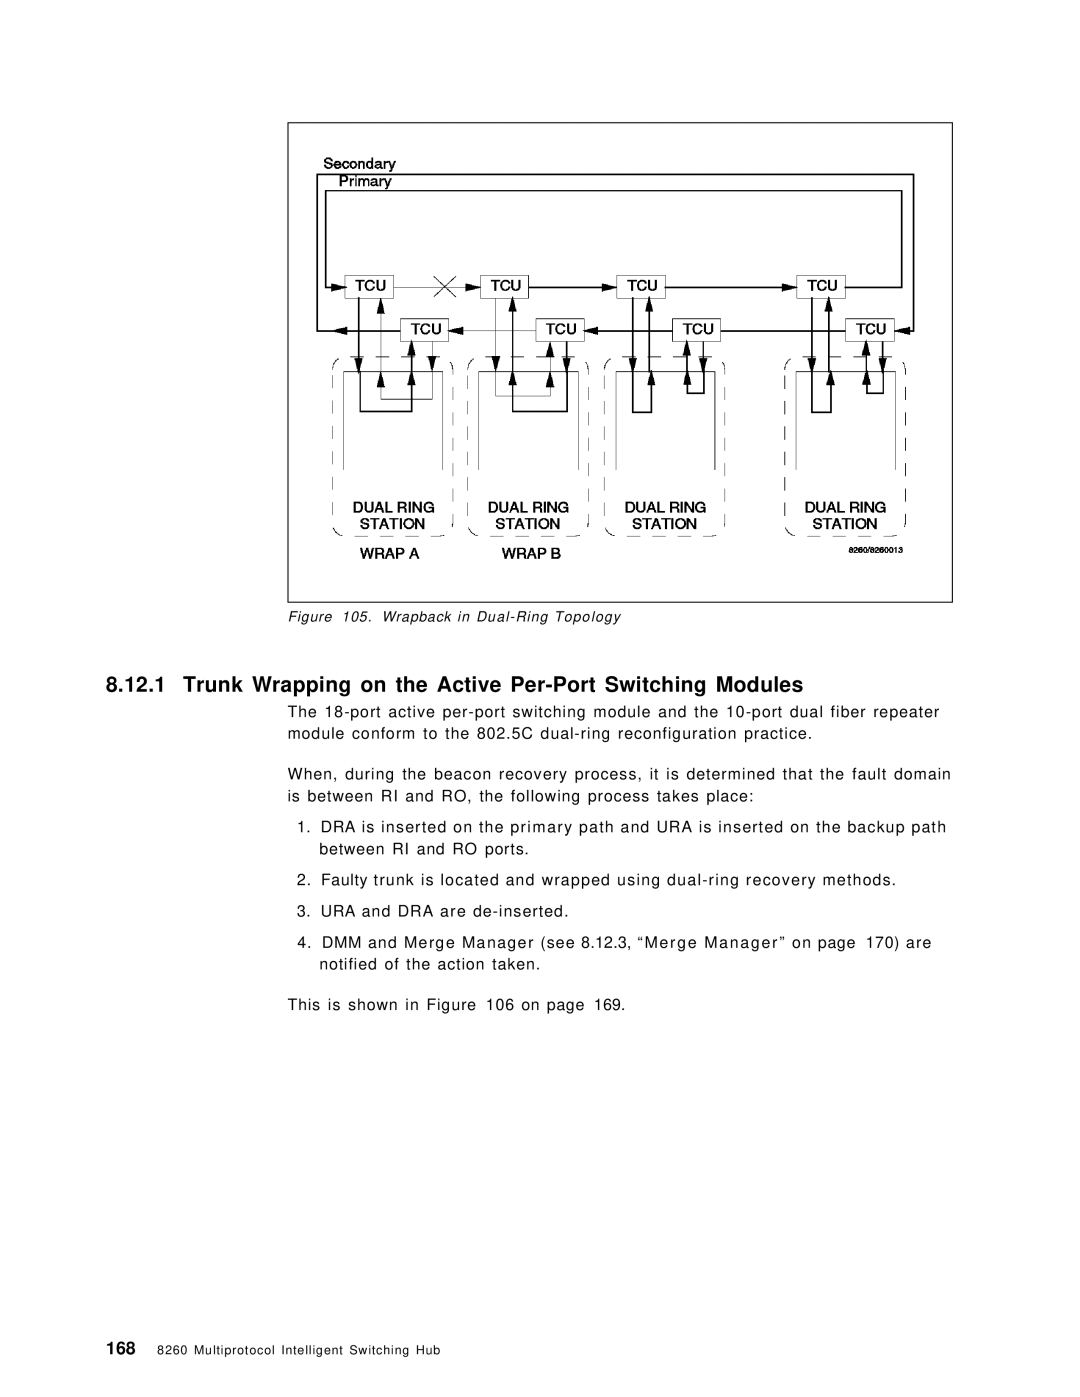 IBM 8260 manual Trunk Wrapping on the Active Per-Port Switching Modules, Wrapback in Dual-Ring Topology 